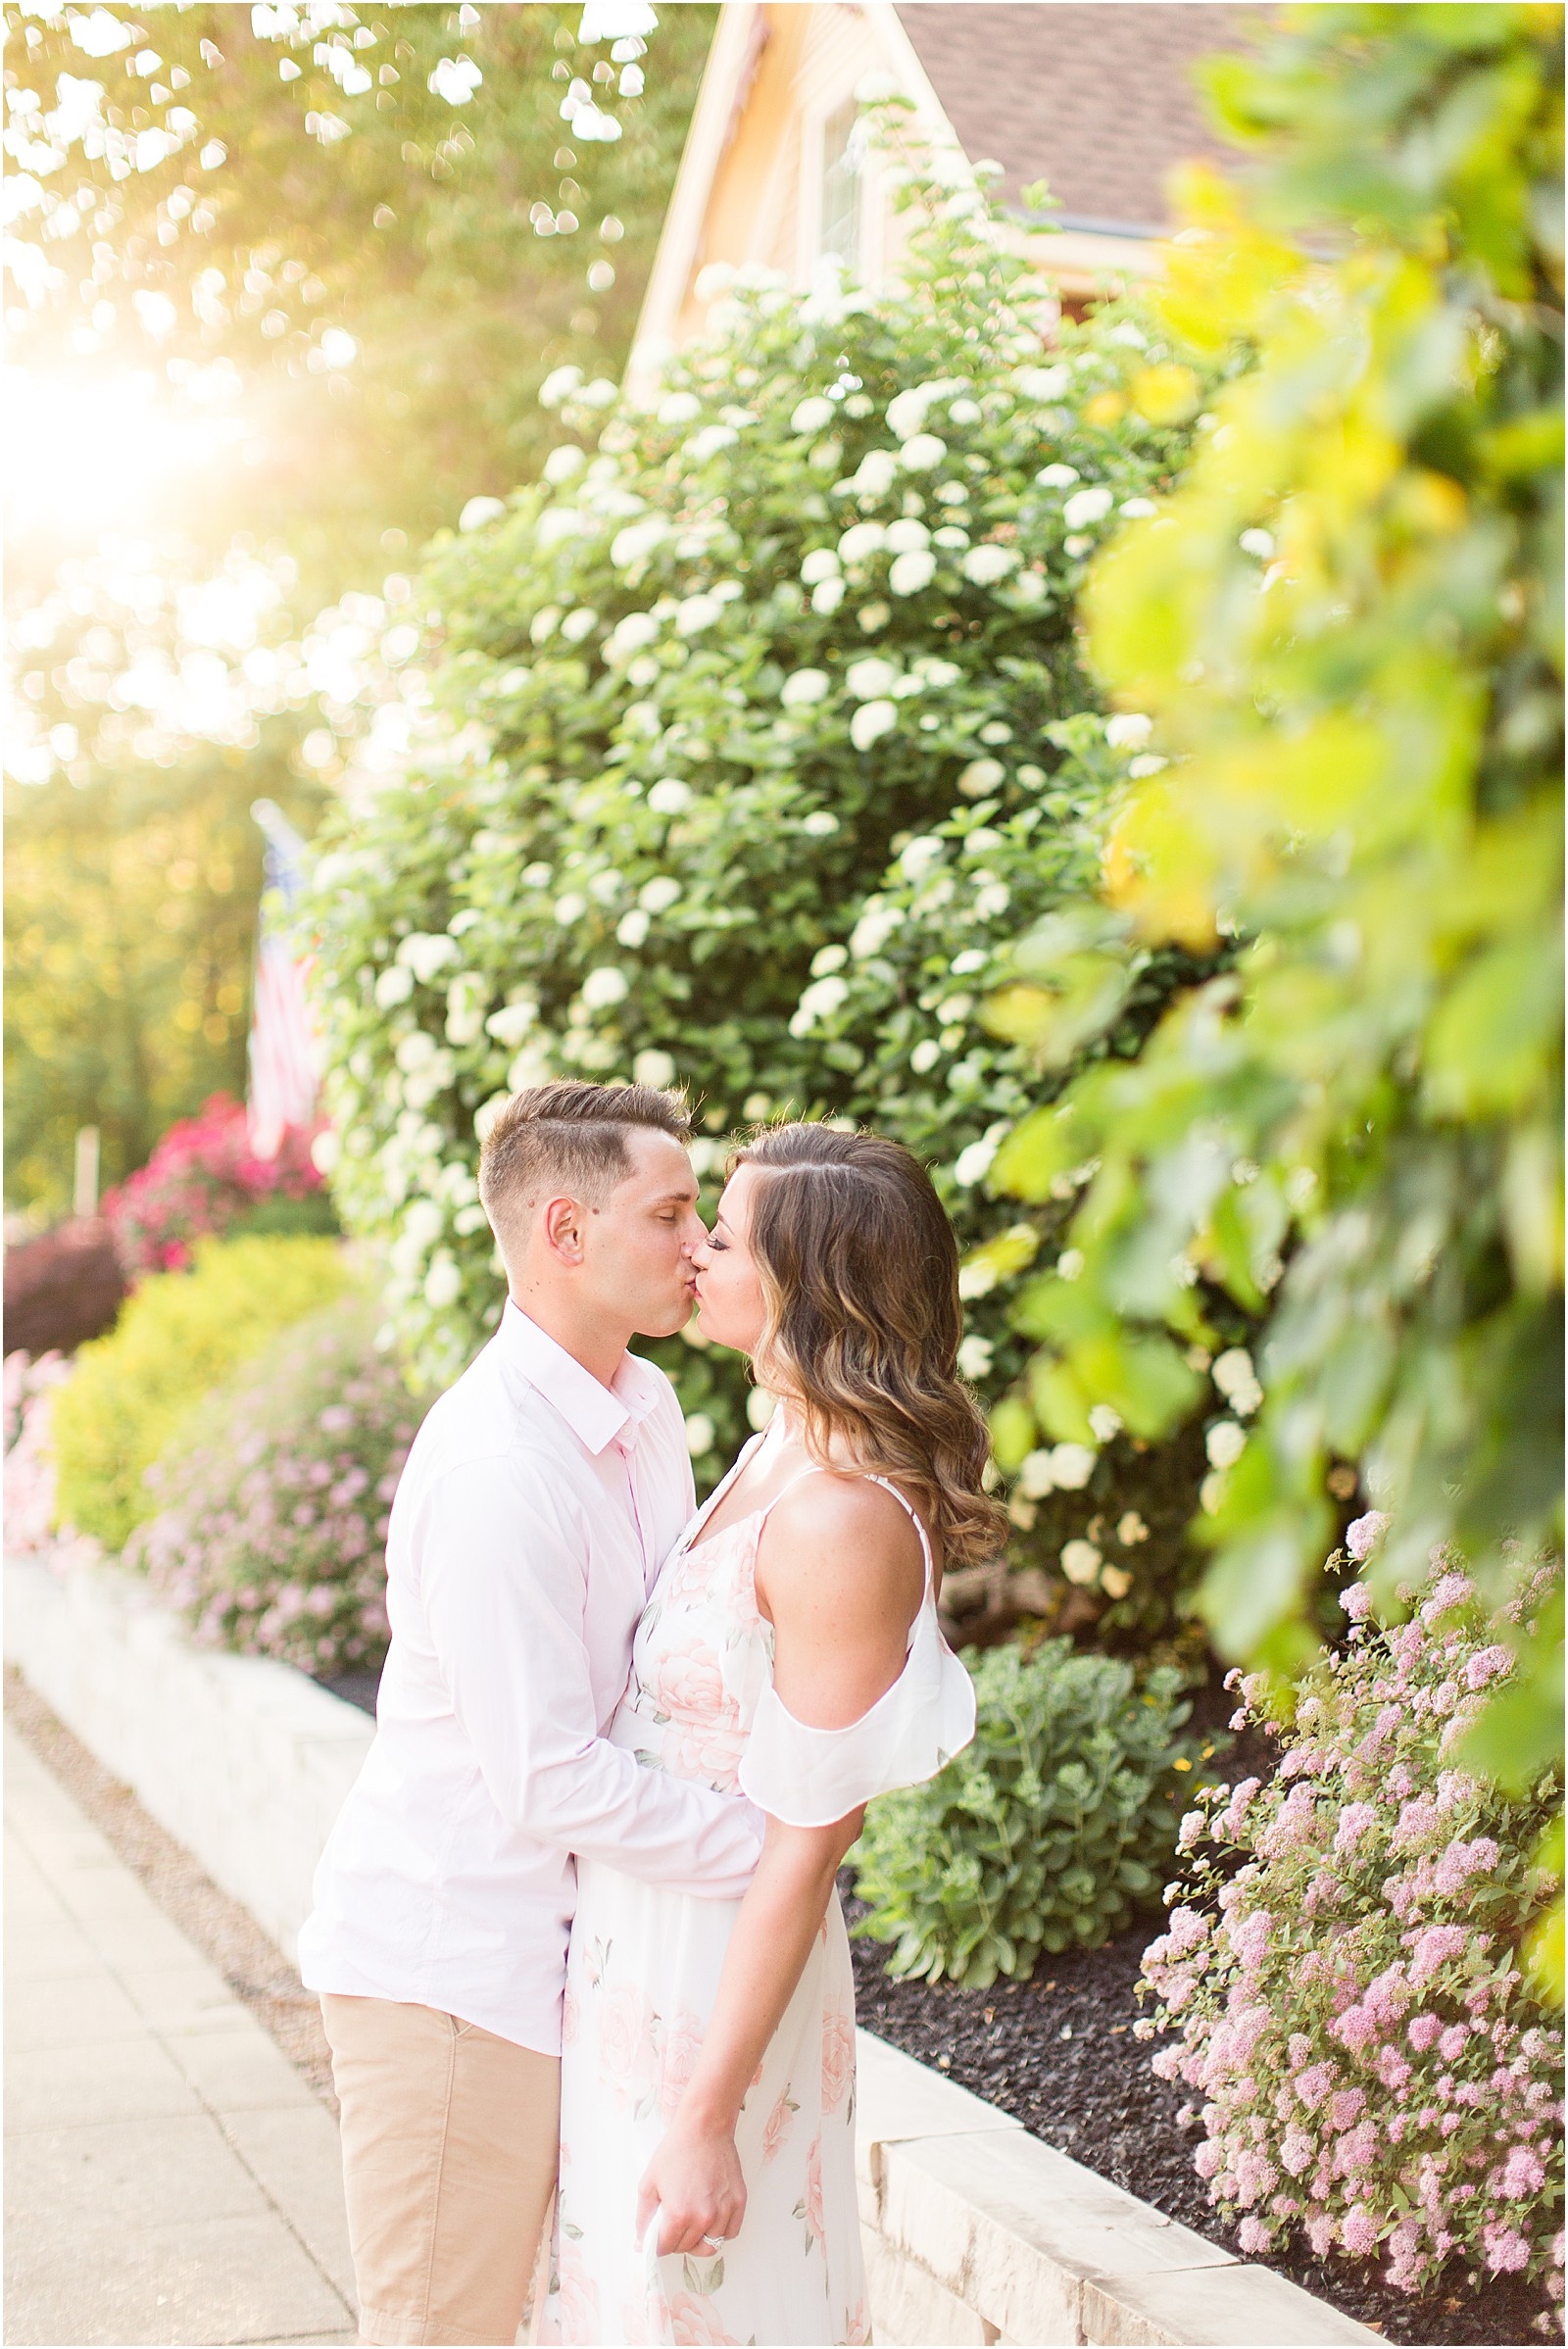 20 West Downtown Newburgh Anniversary Session | Katie and Bobby | Bret and Brandie Photography 008.jpg